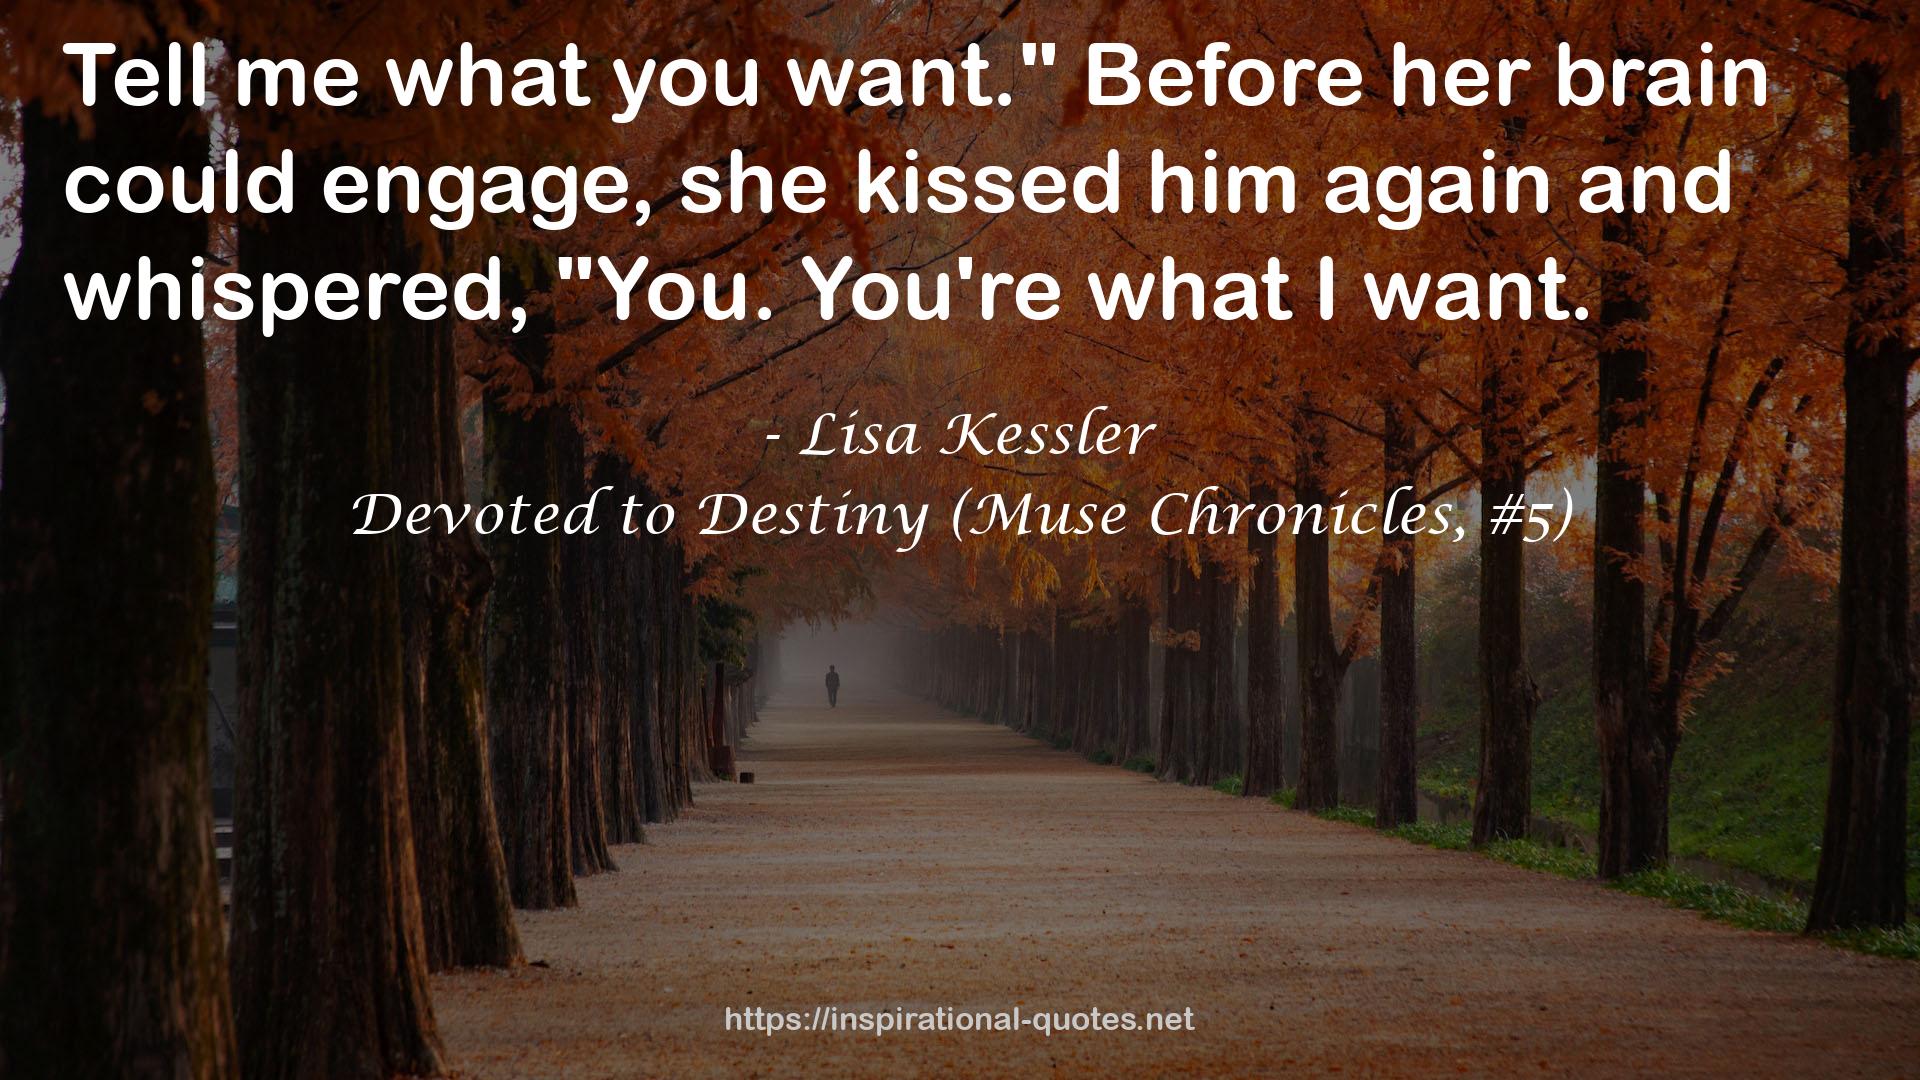 Devoted to Destiny (Muse Chronicles, #5) QUOTES